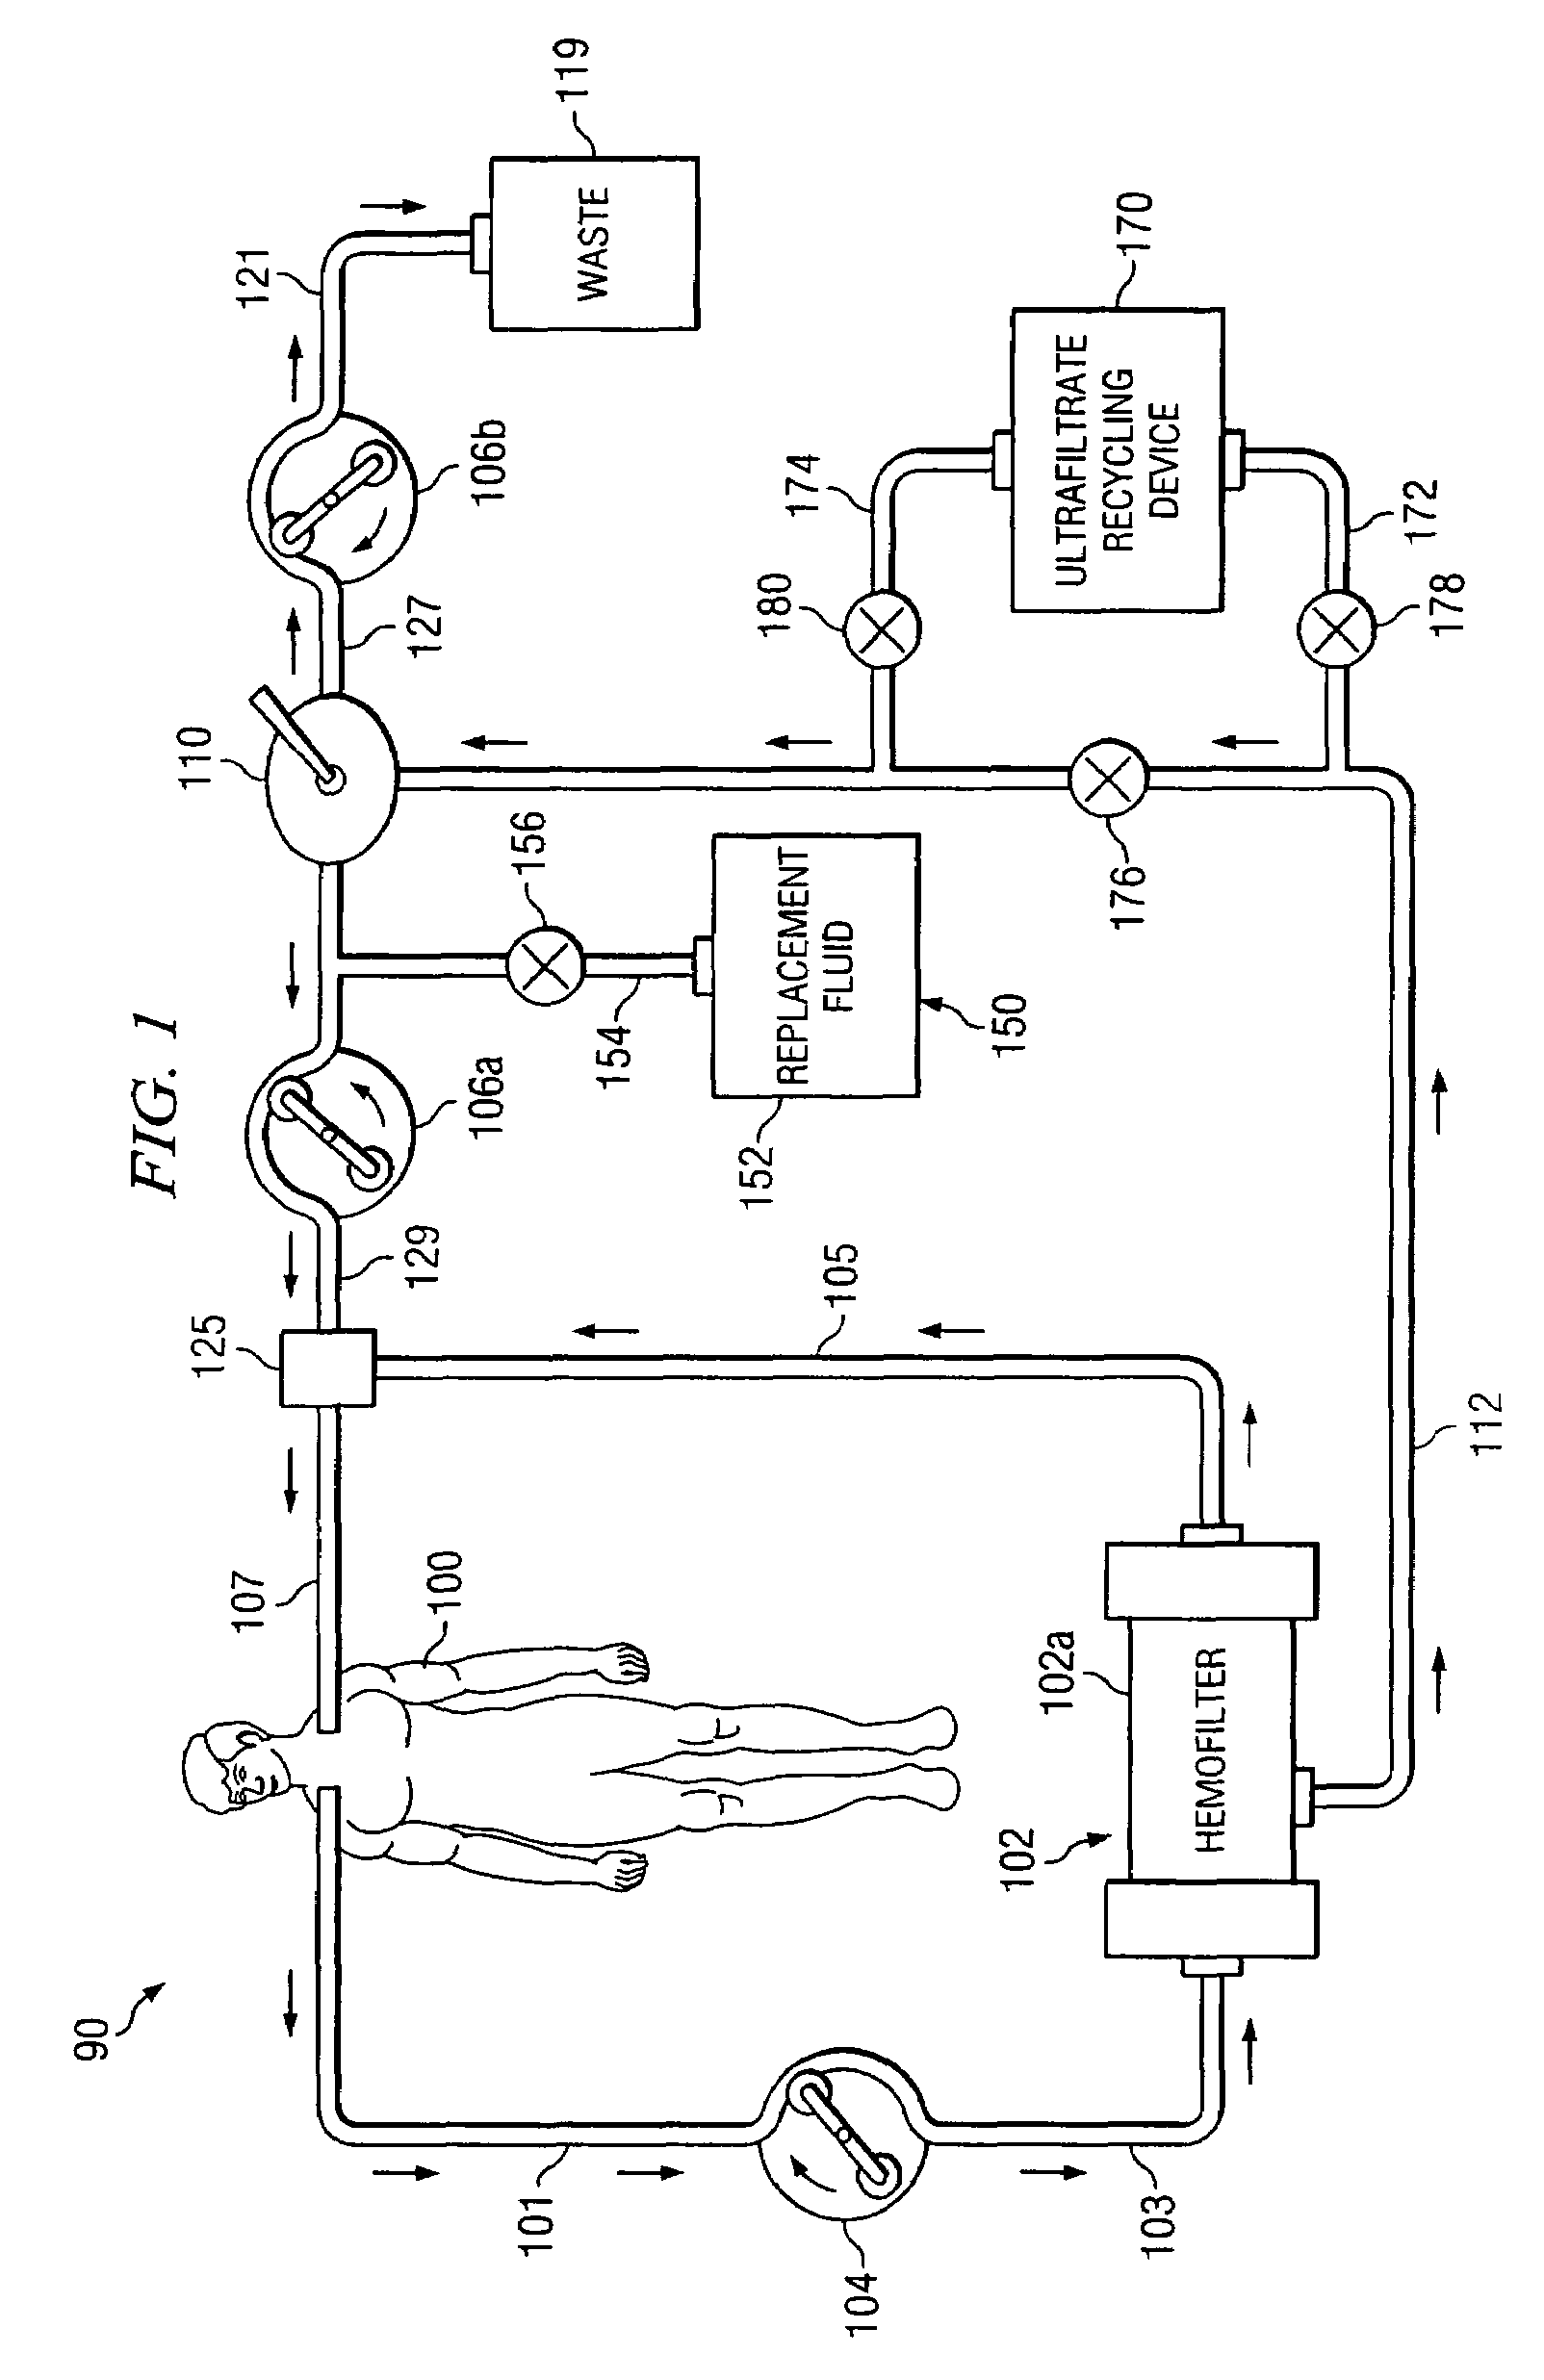 Method and system for colloid exchange therapy